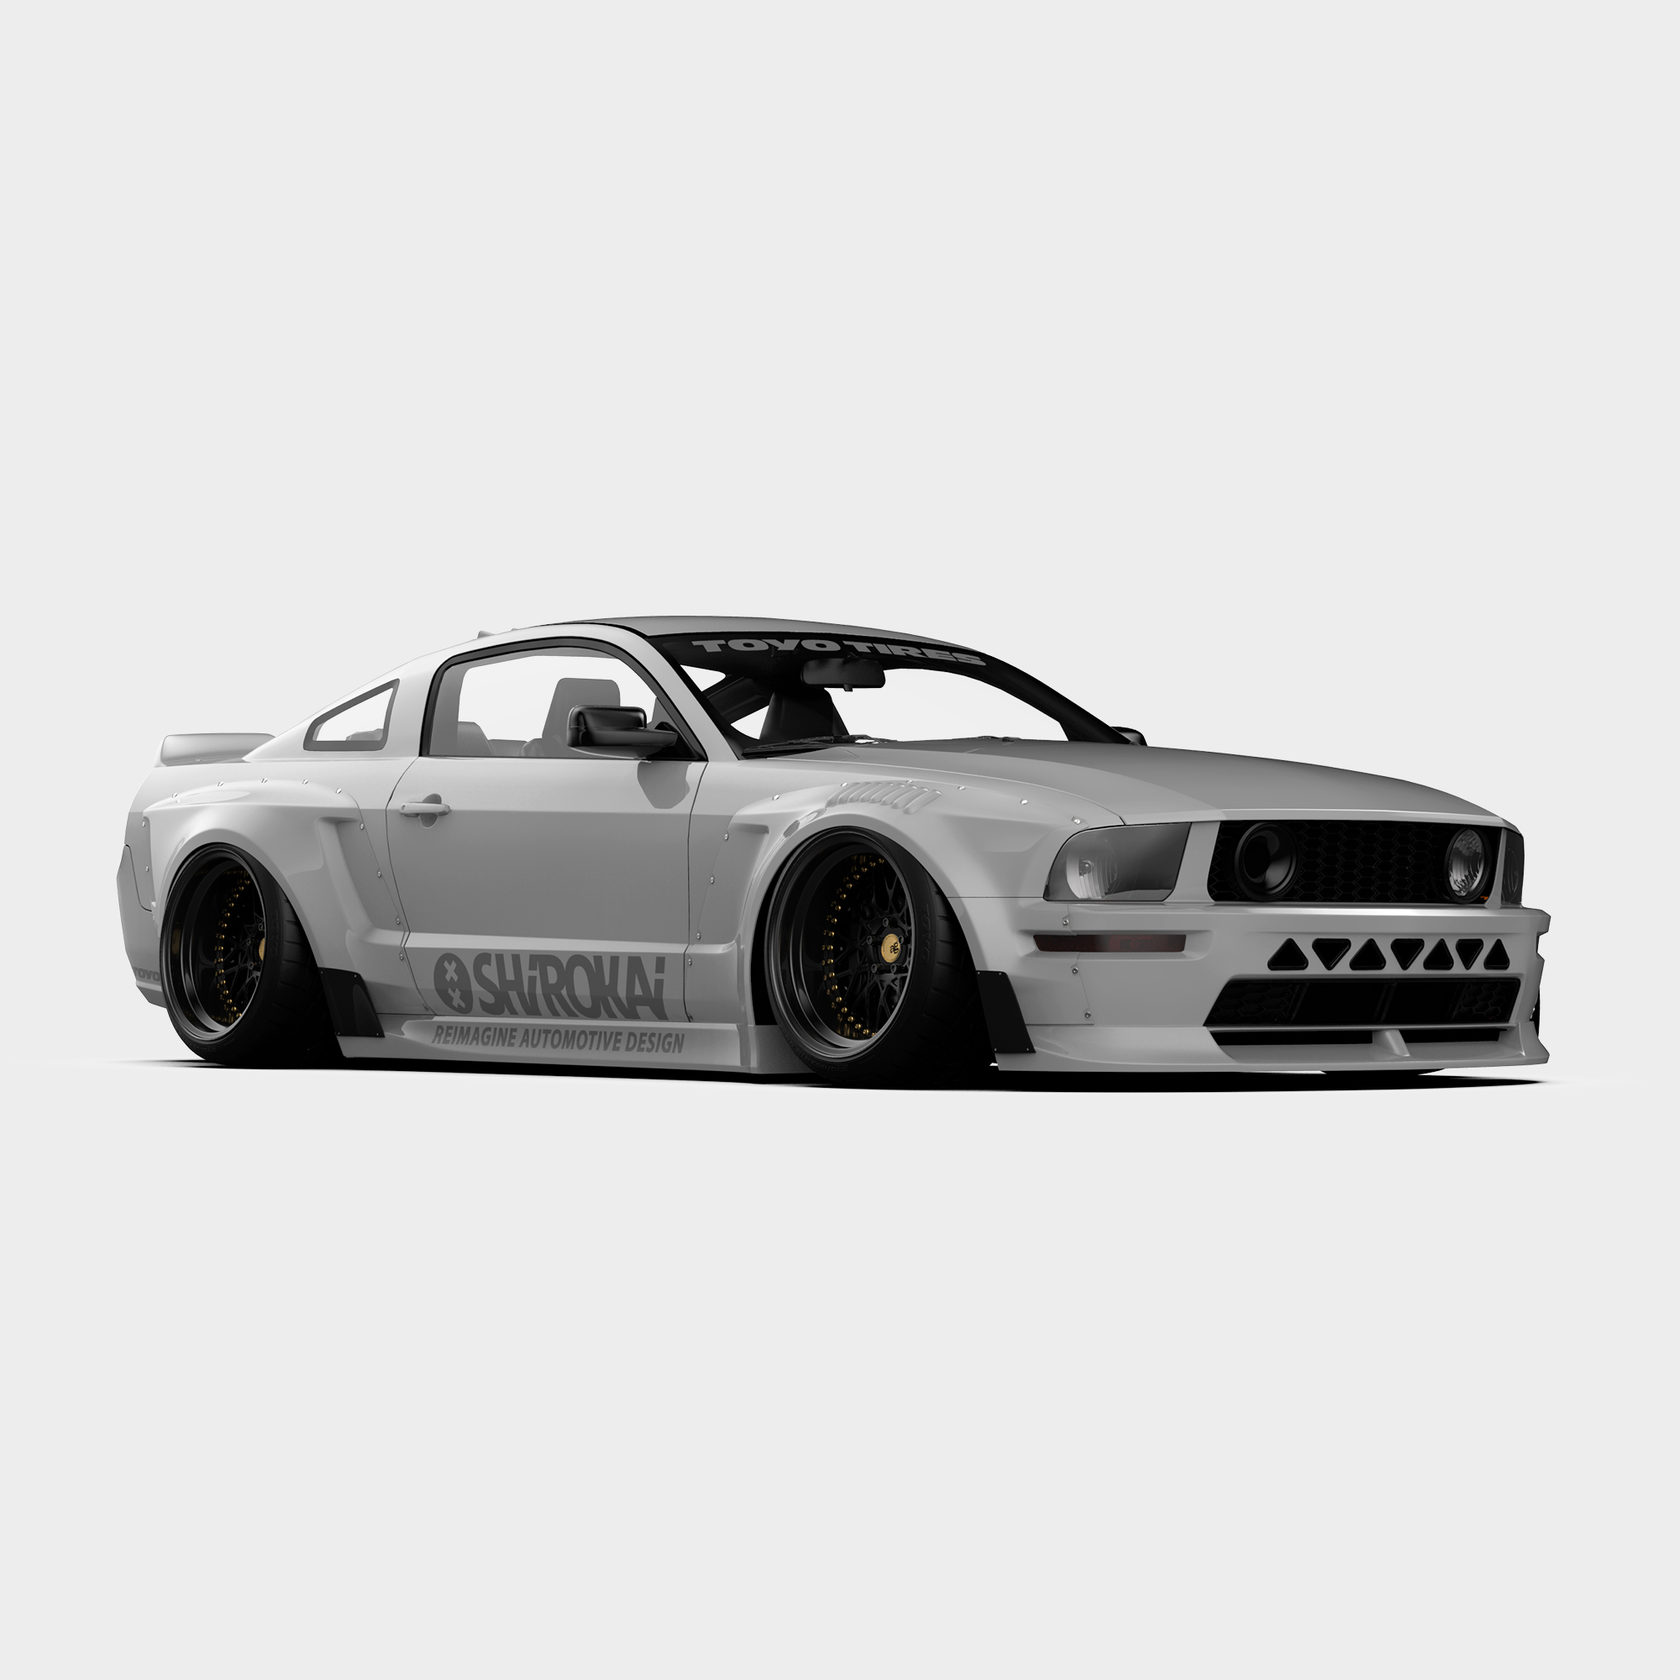 2008 ford mustang wide body kit - www.optuseducation.com.